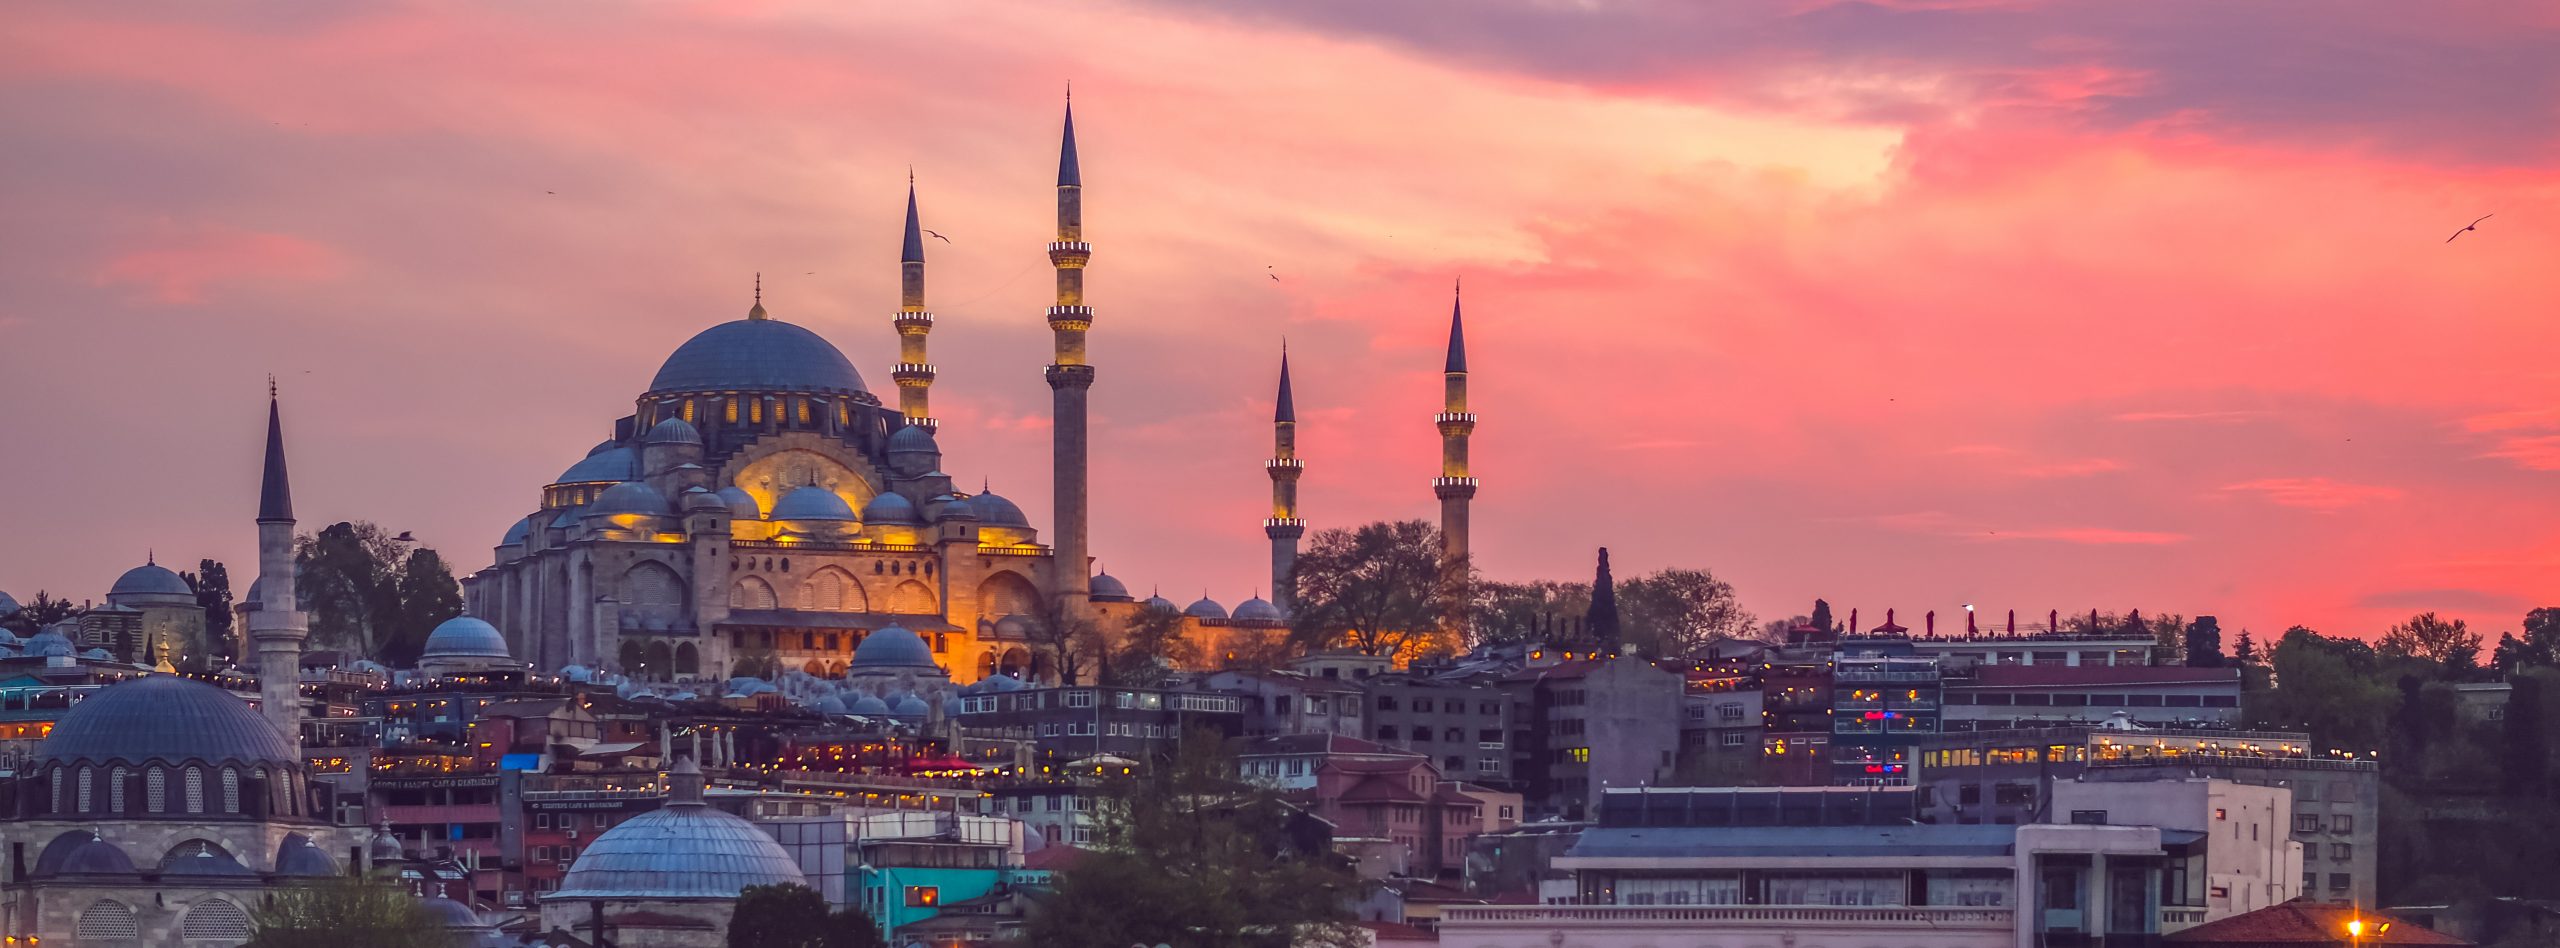 Students arrested in Turkey over Mecca poster with LGBT flags